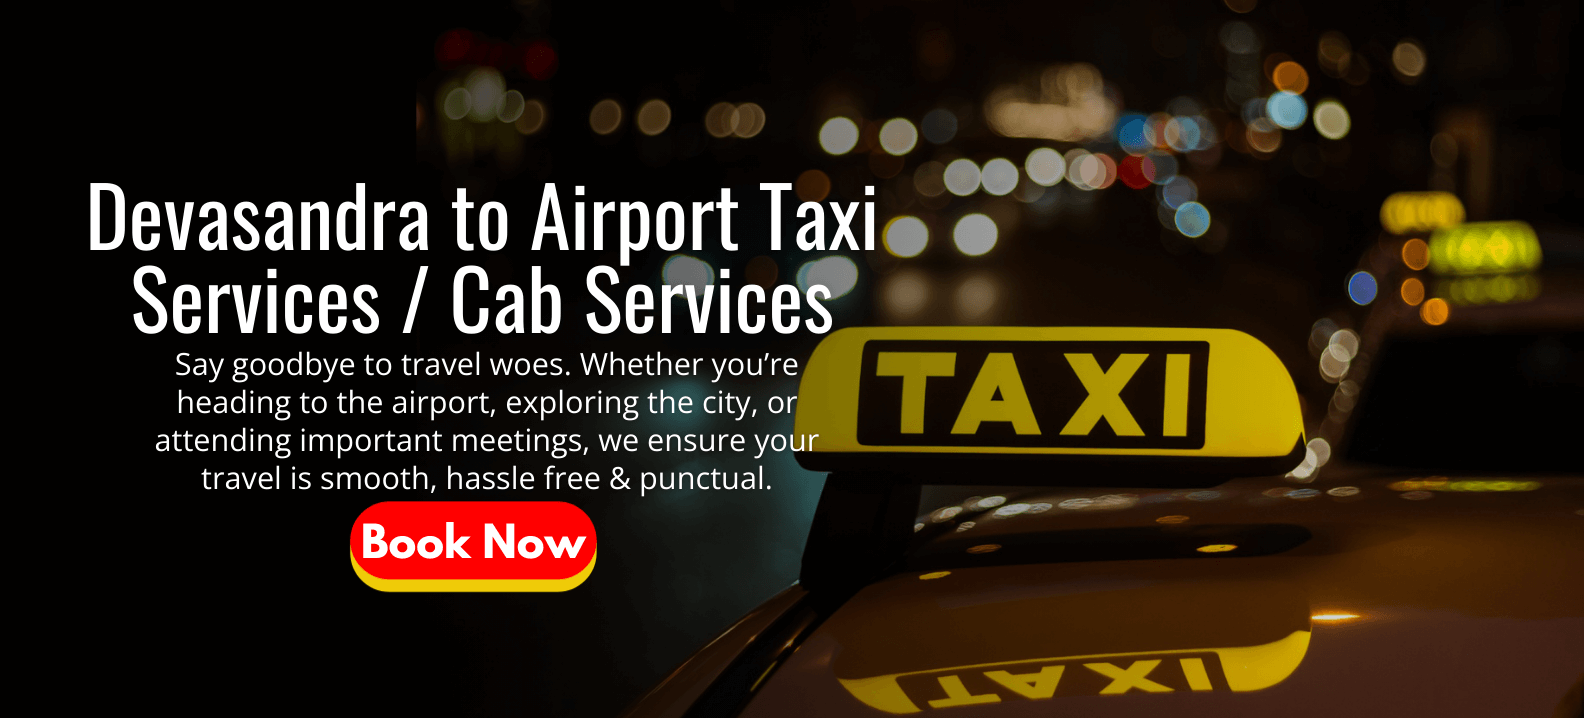 Devasandra to Airport Taxi Services _ Cab Services